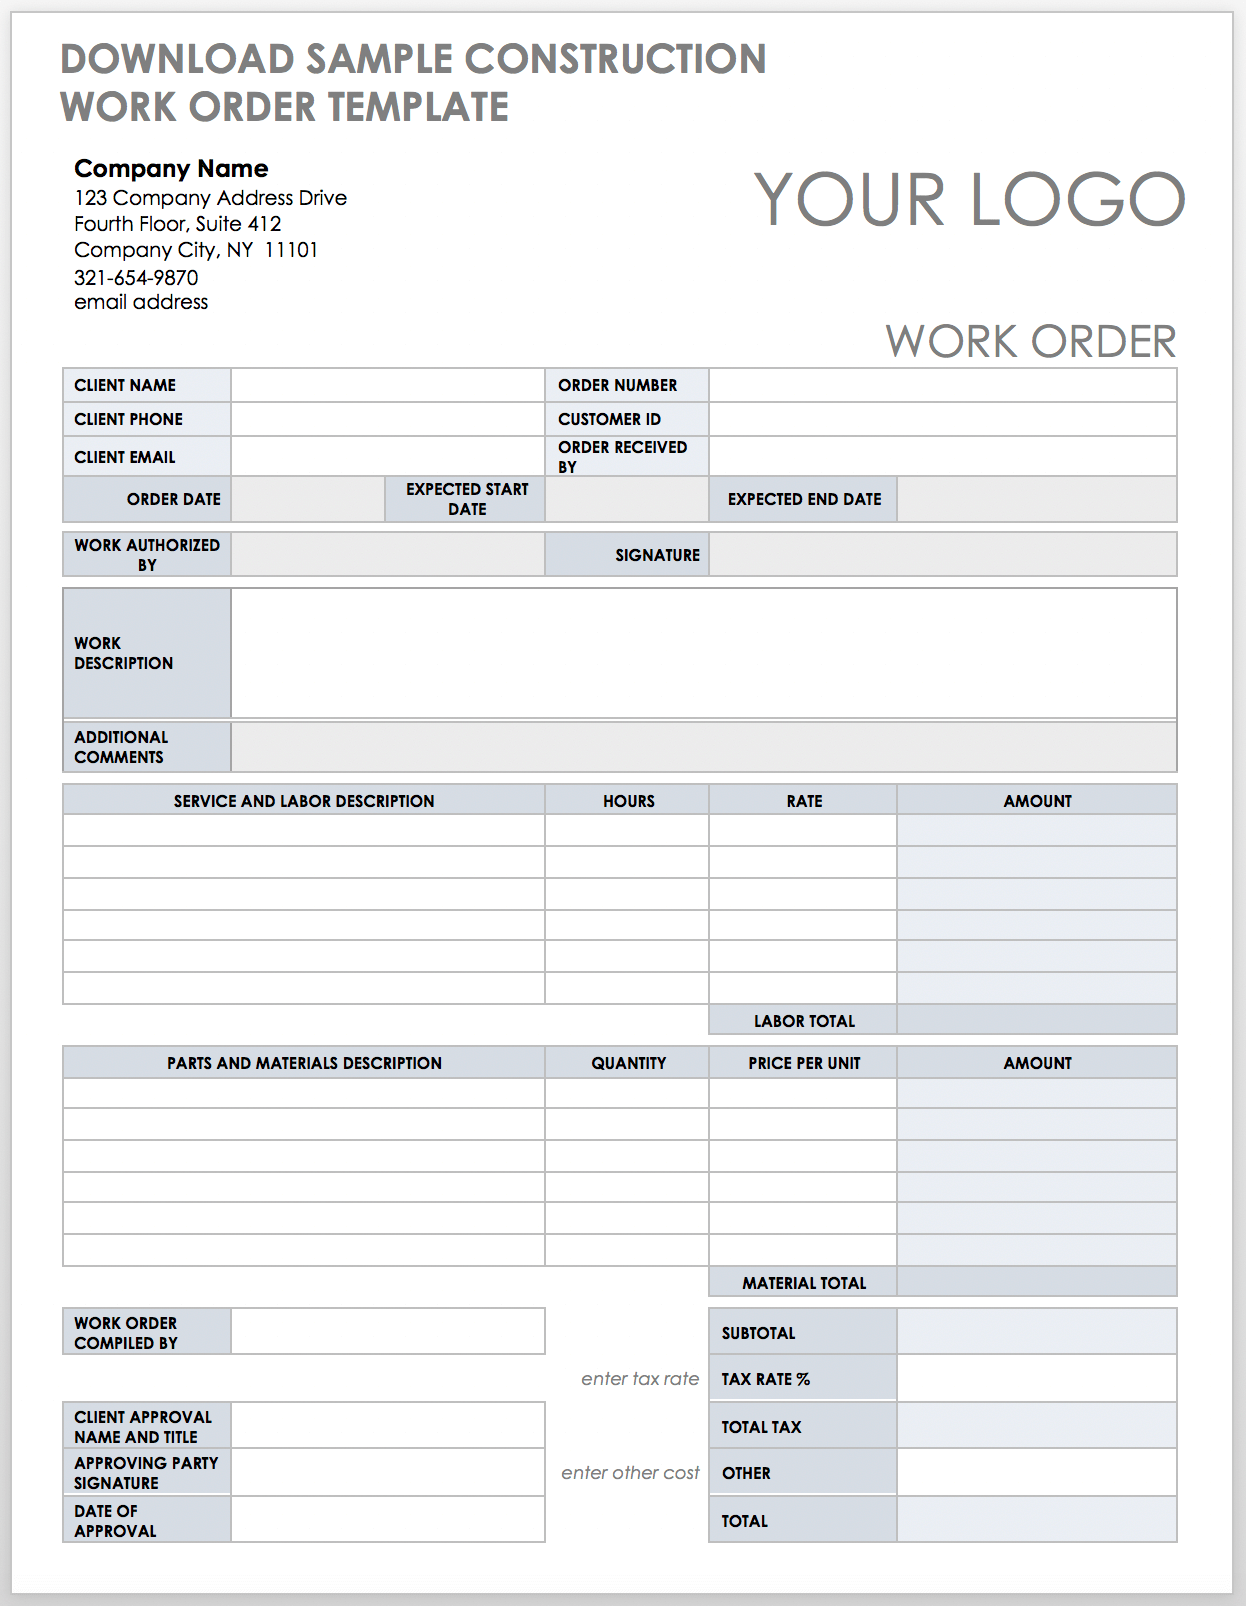 free construction work schedule template